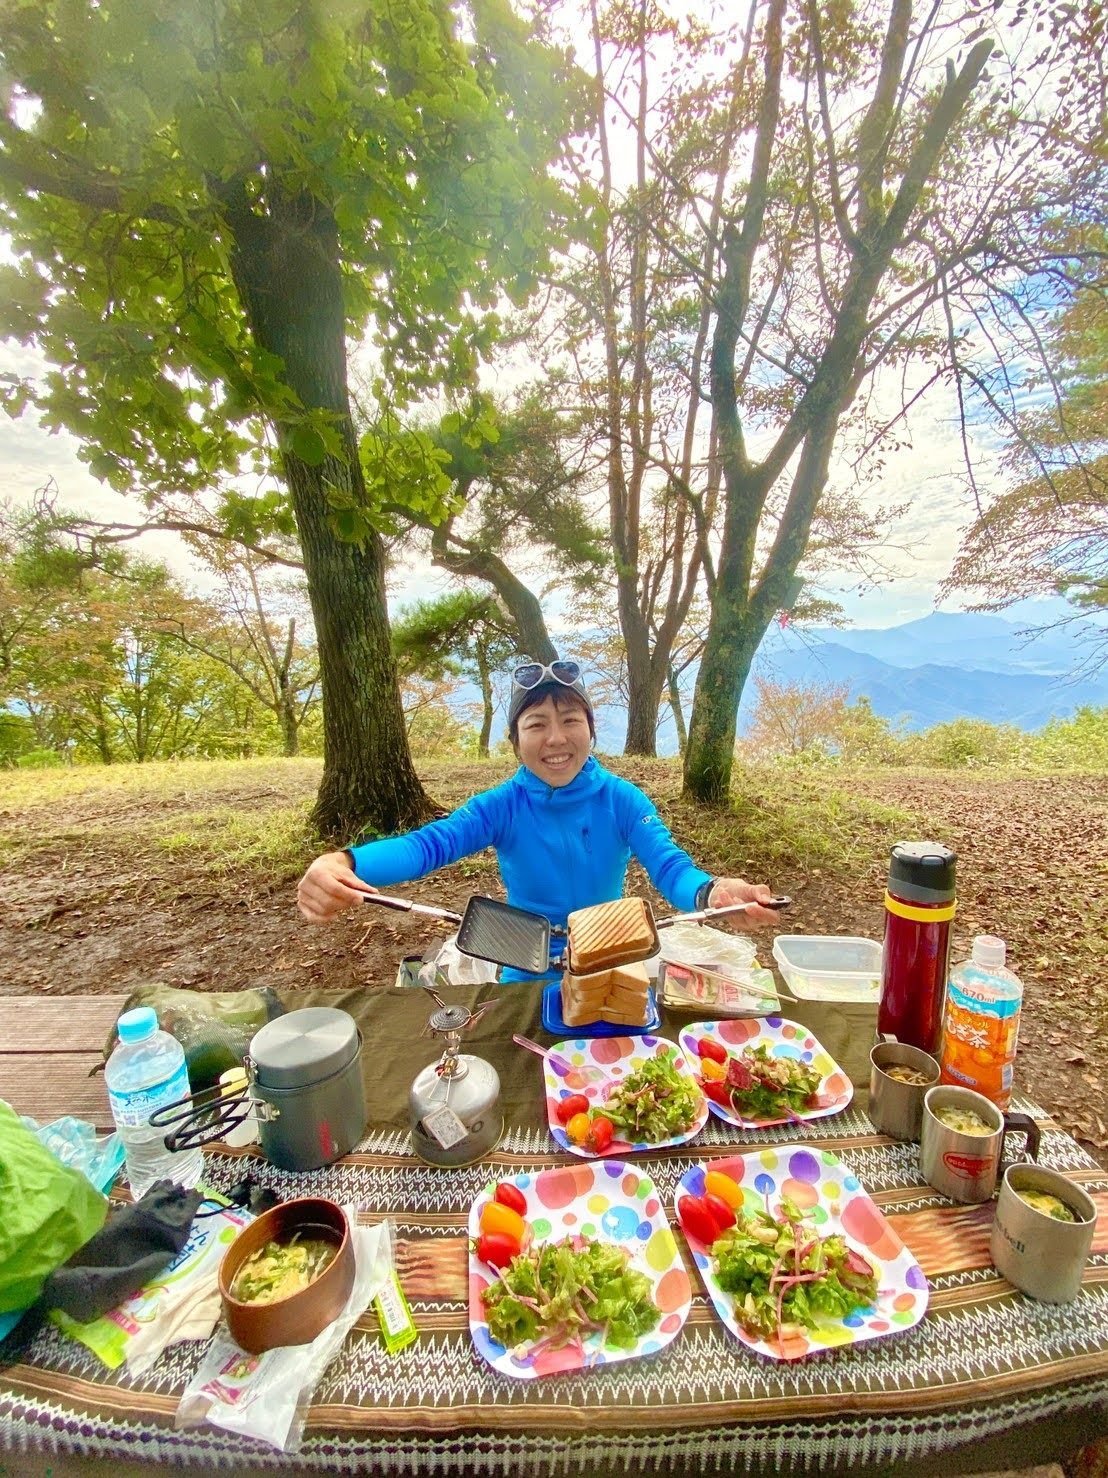 A Japanese hiking guide preparing a lunch of salad, toasted sandwiches and soup.